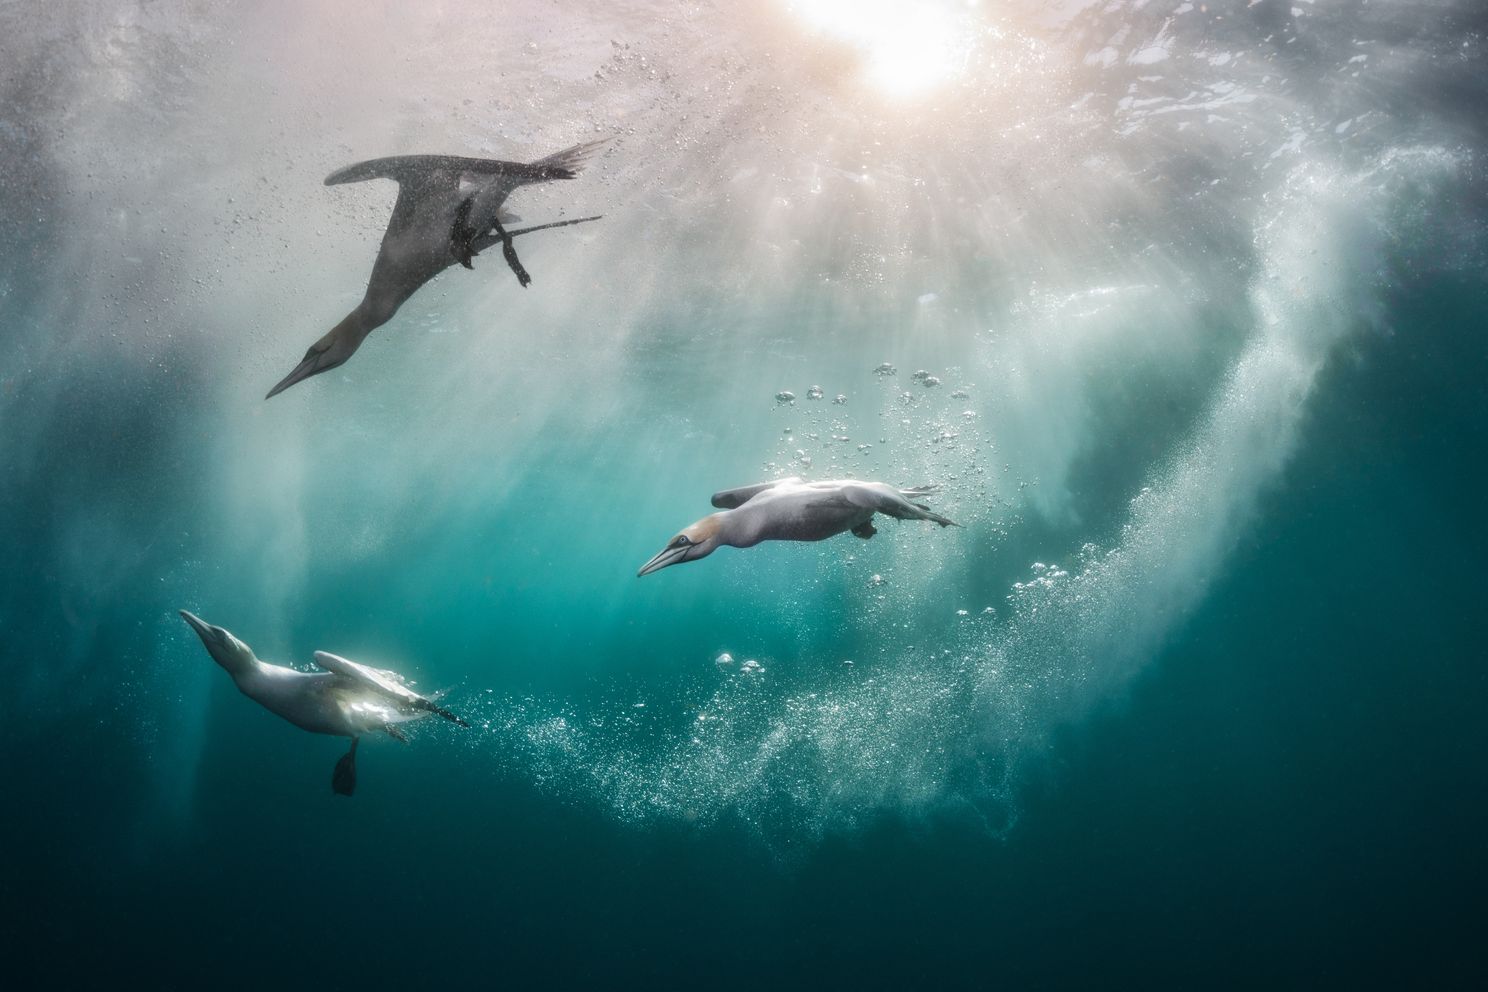 gannets diving underwater and swimming